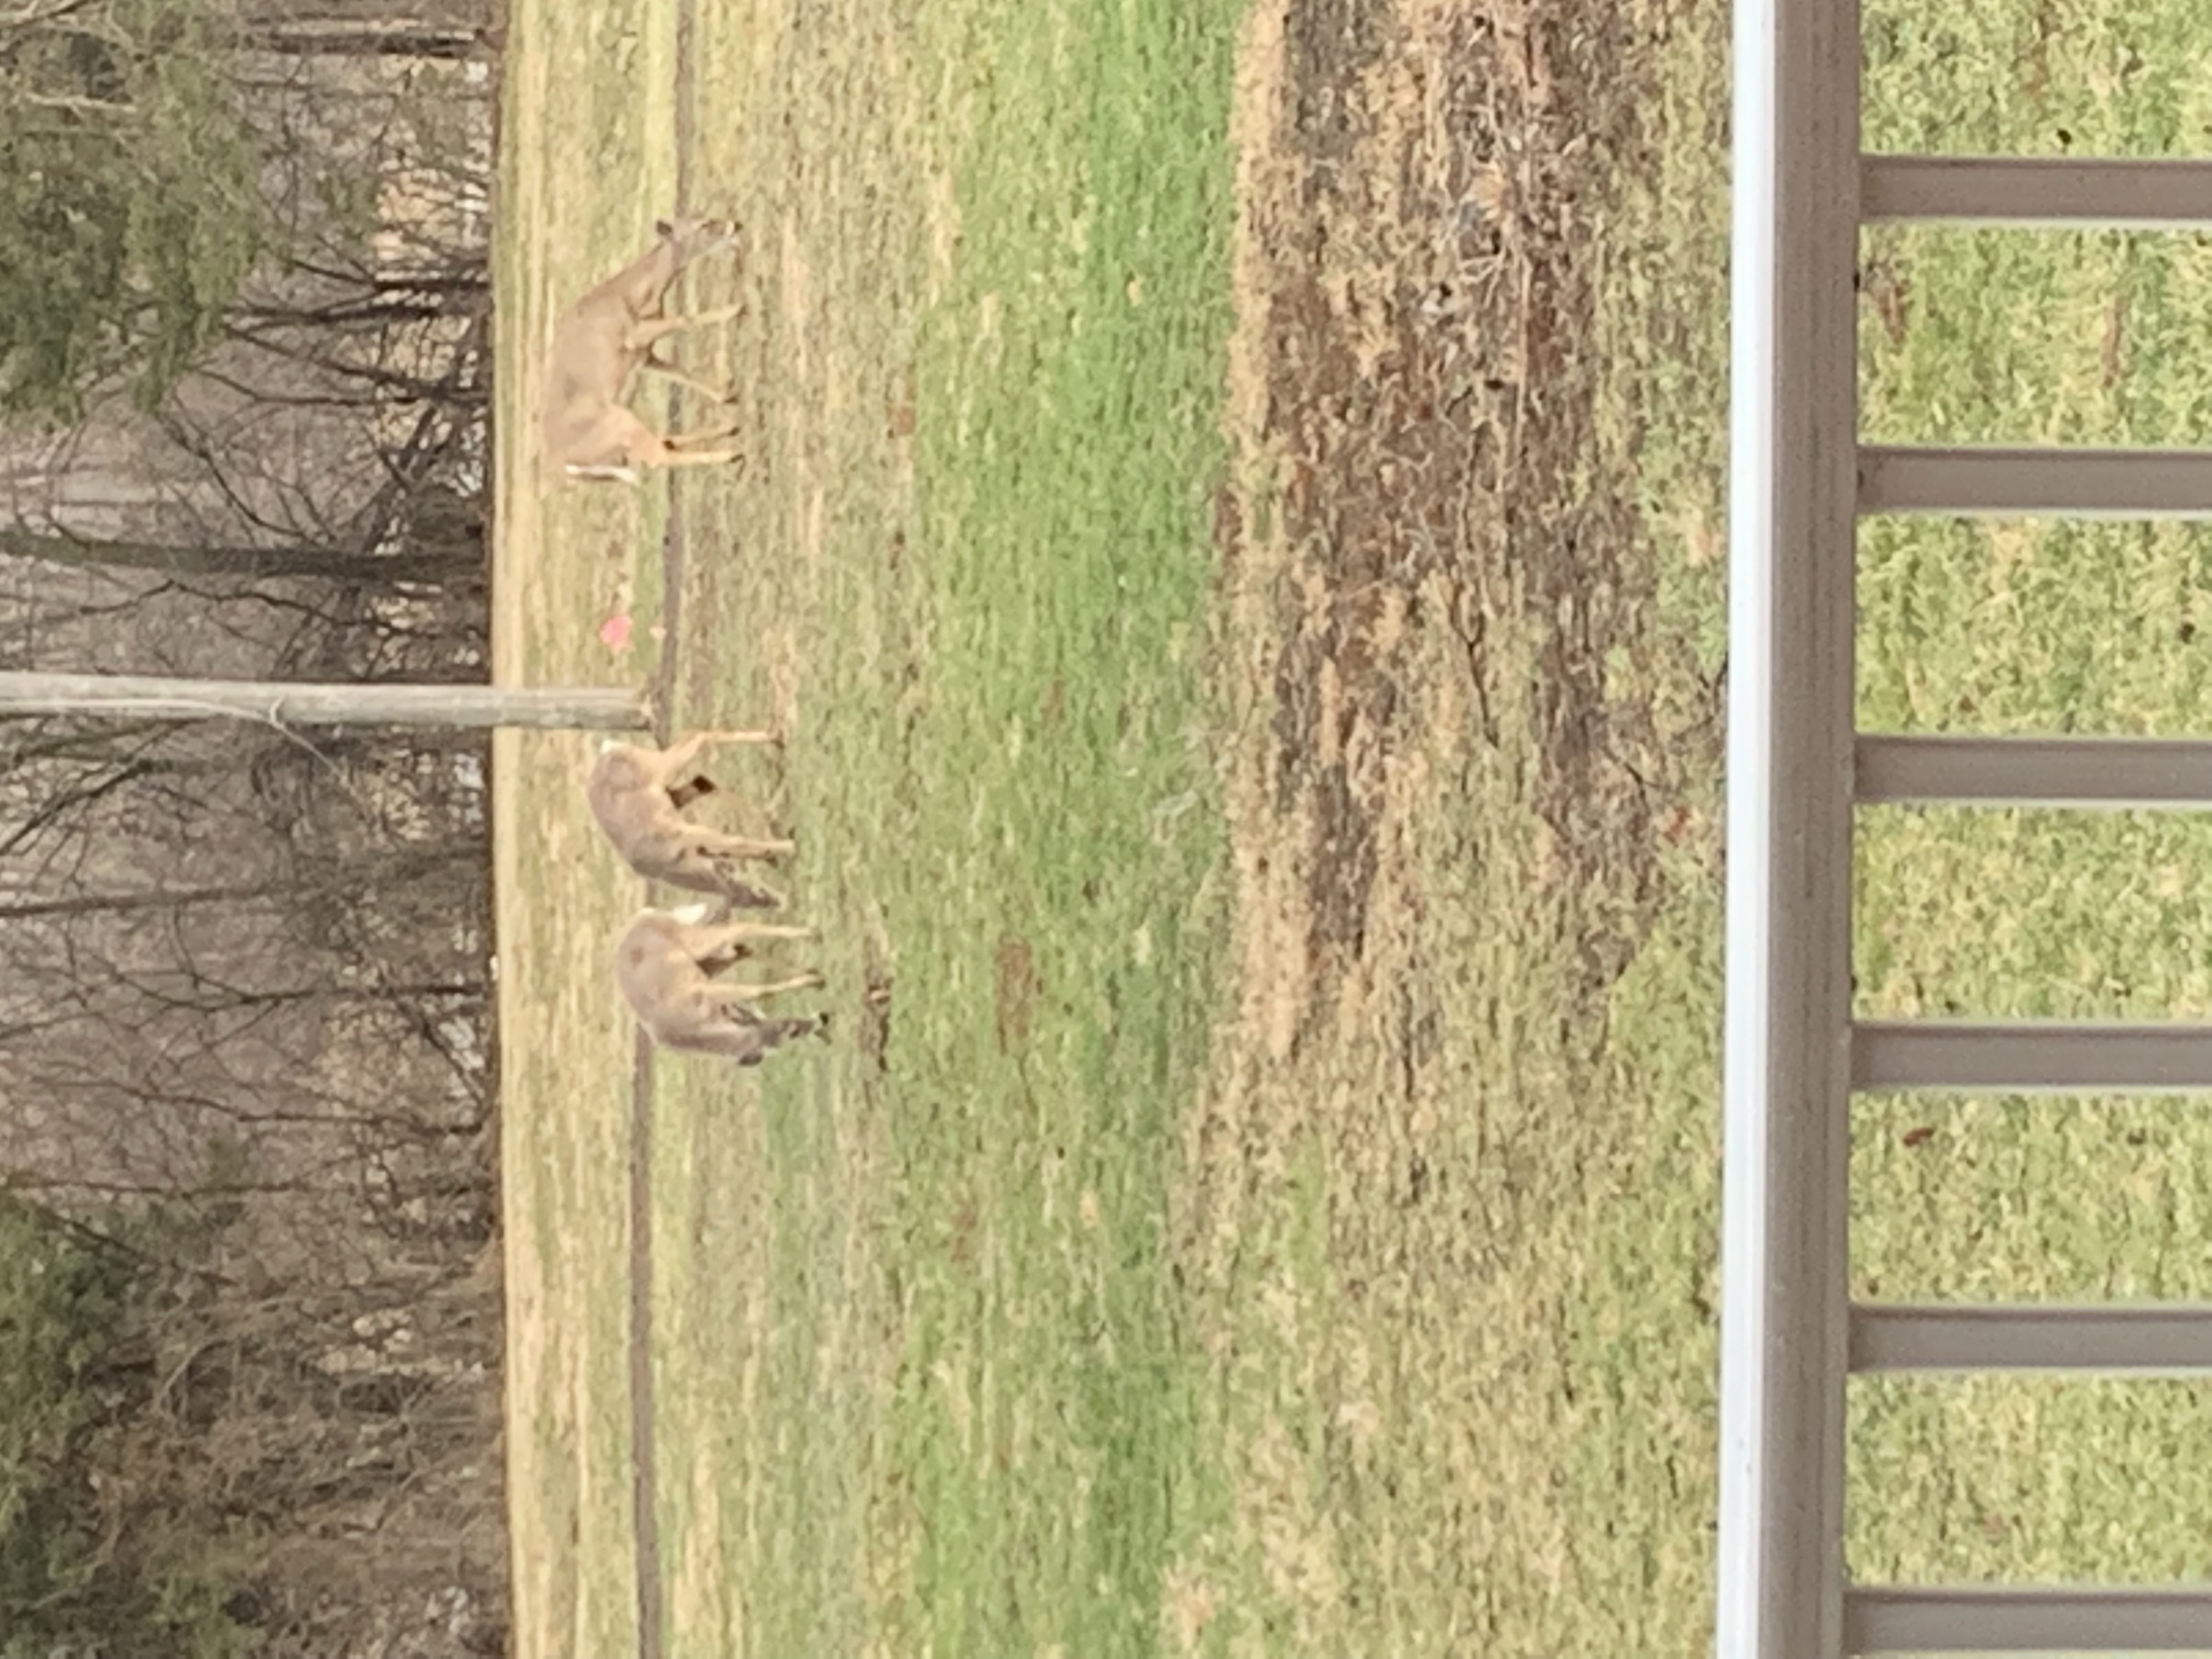 The view from the kitchen: 3 white-tailed deer grazing in the front yard